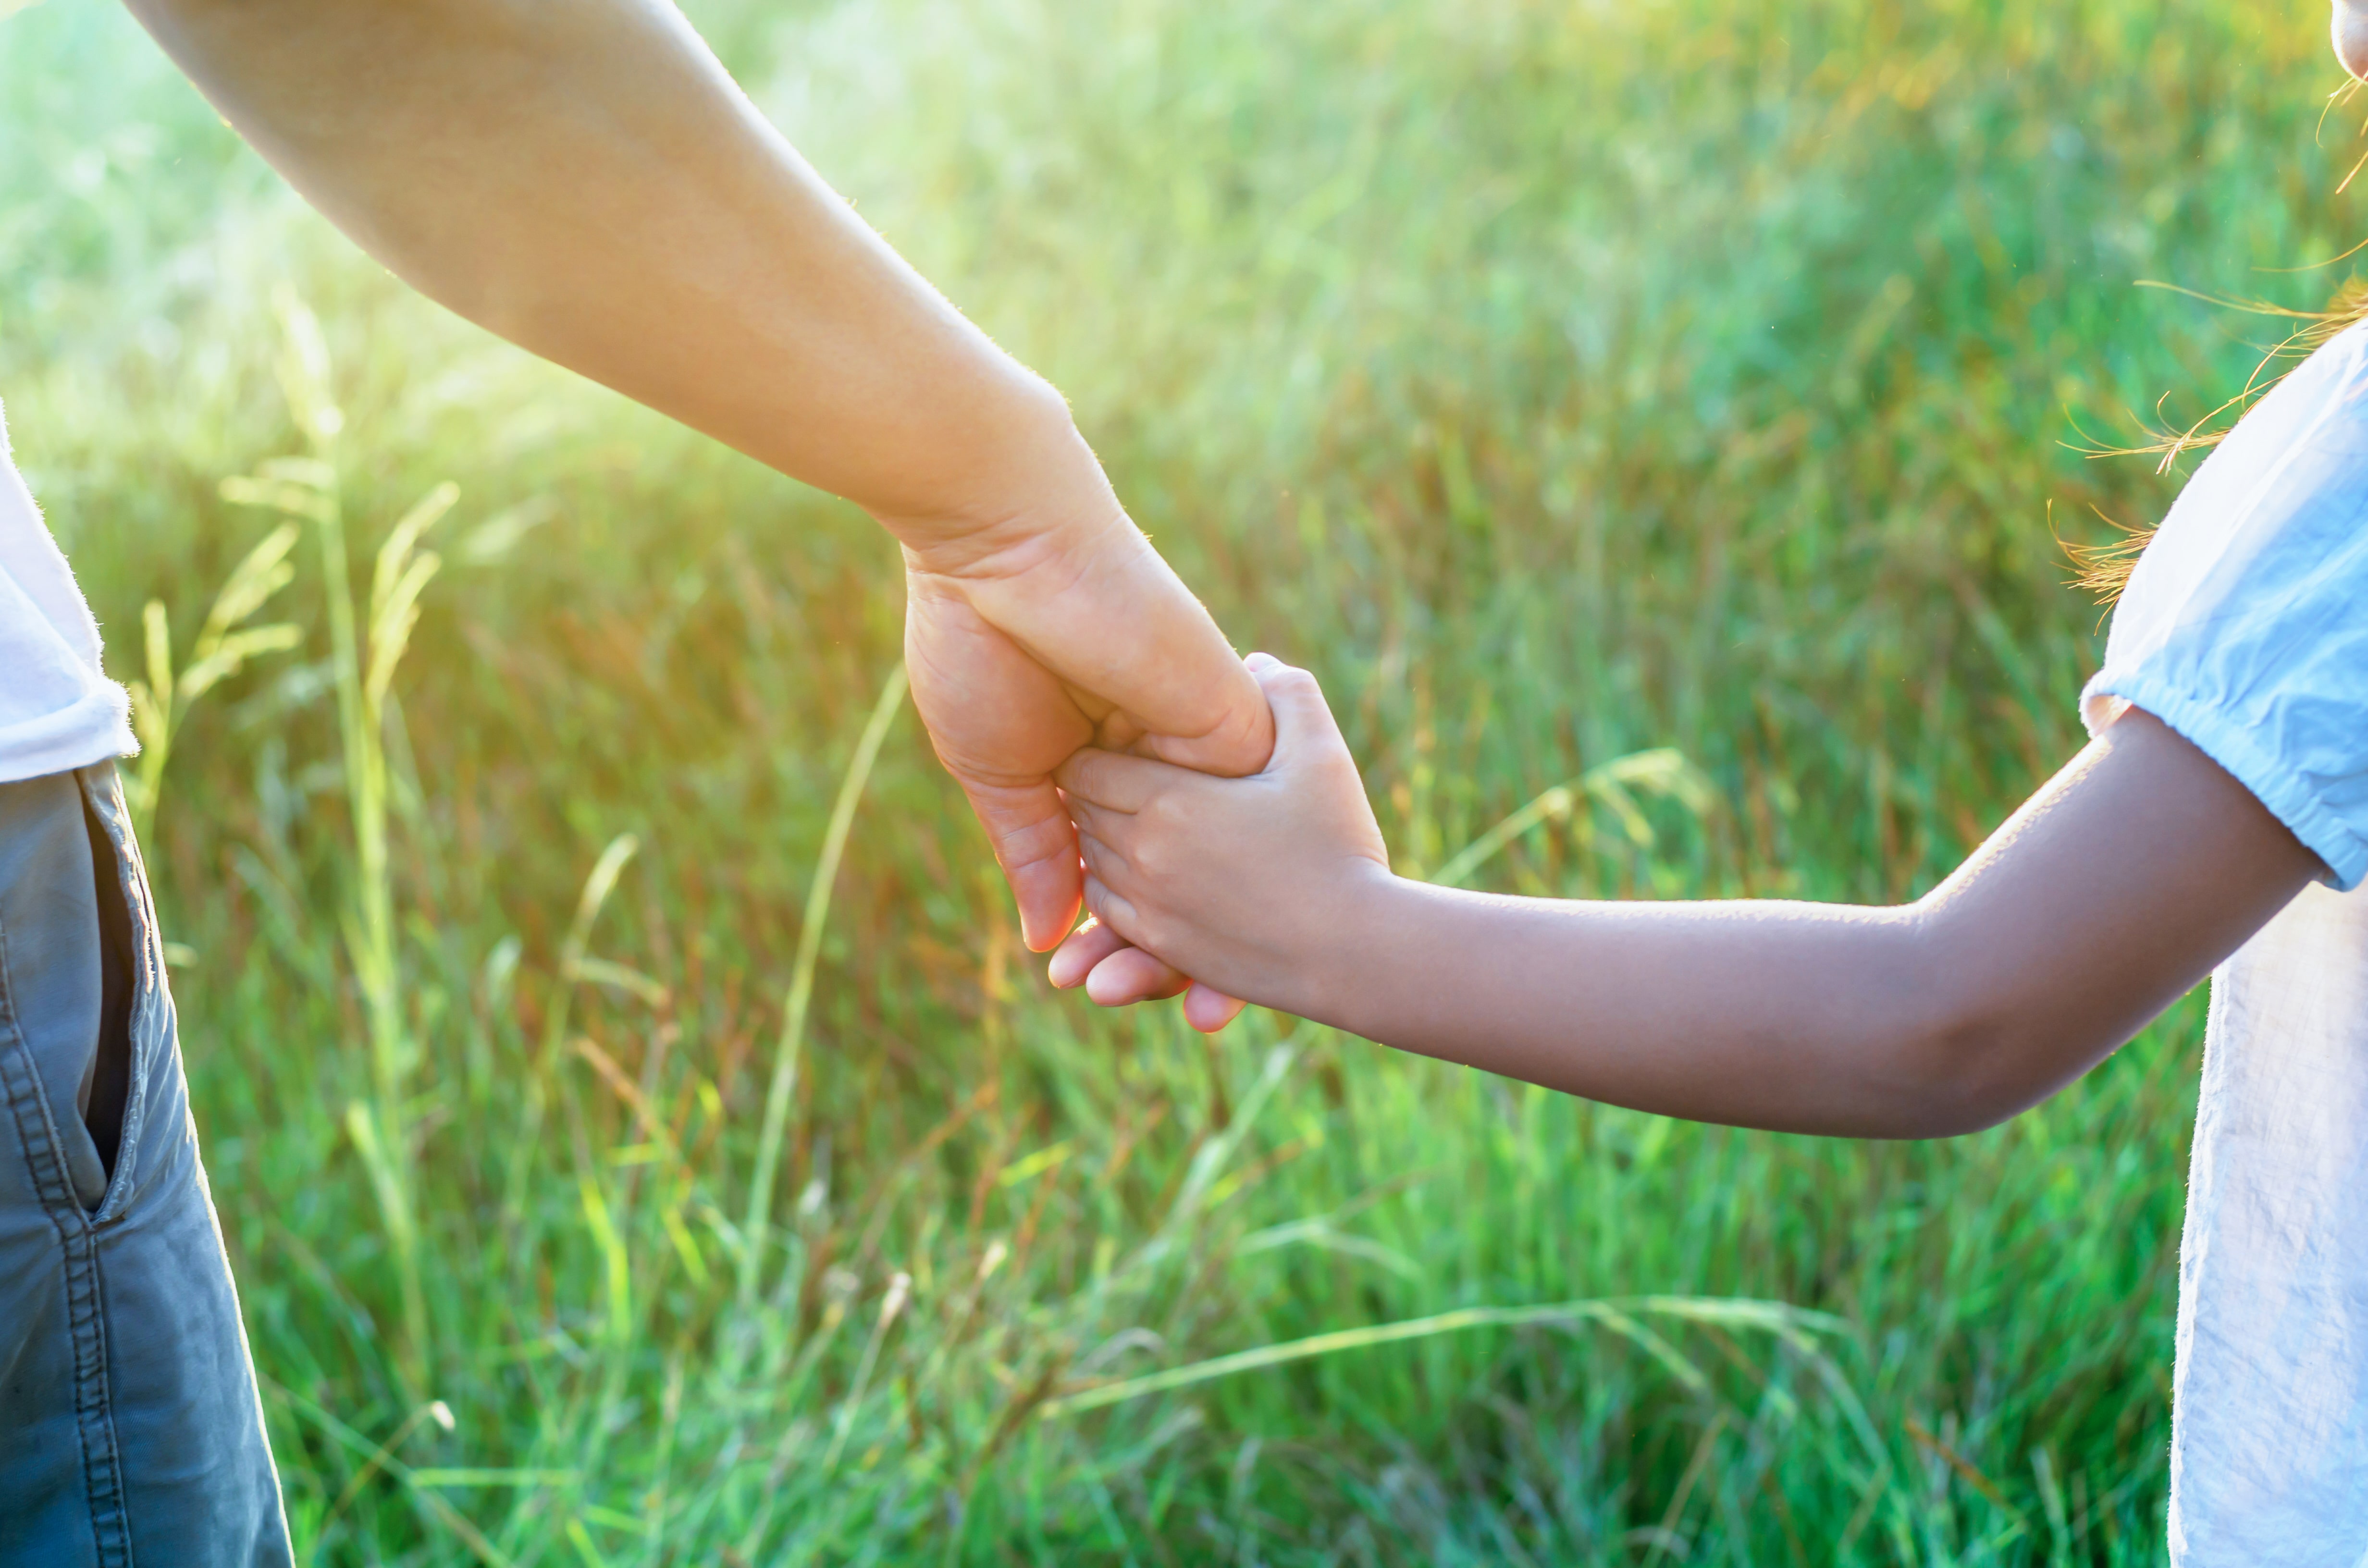 Child Custody Laws in New Jersey: The Basics